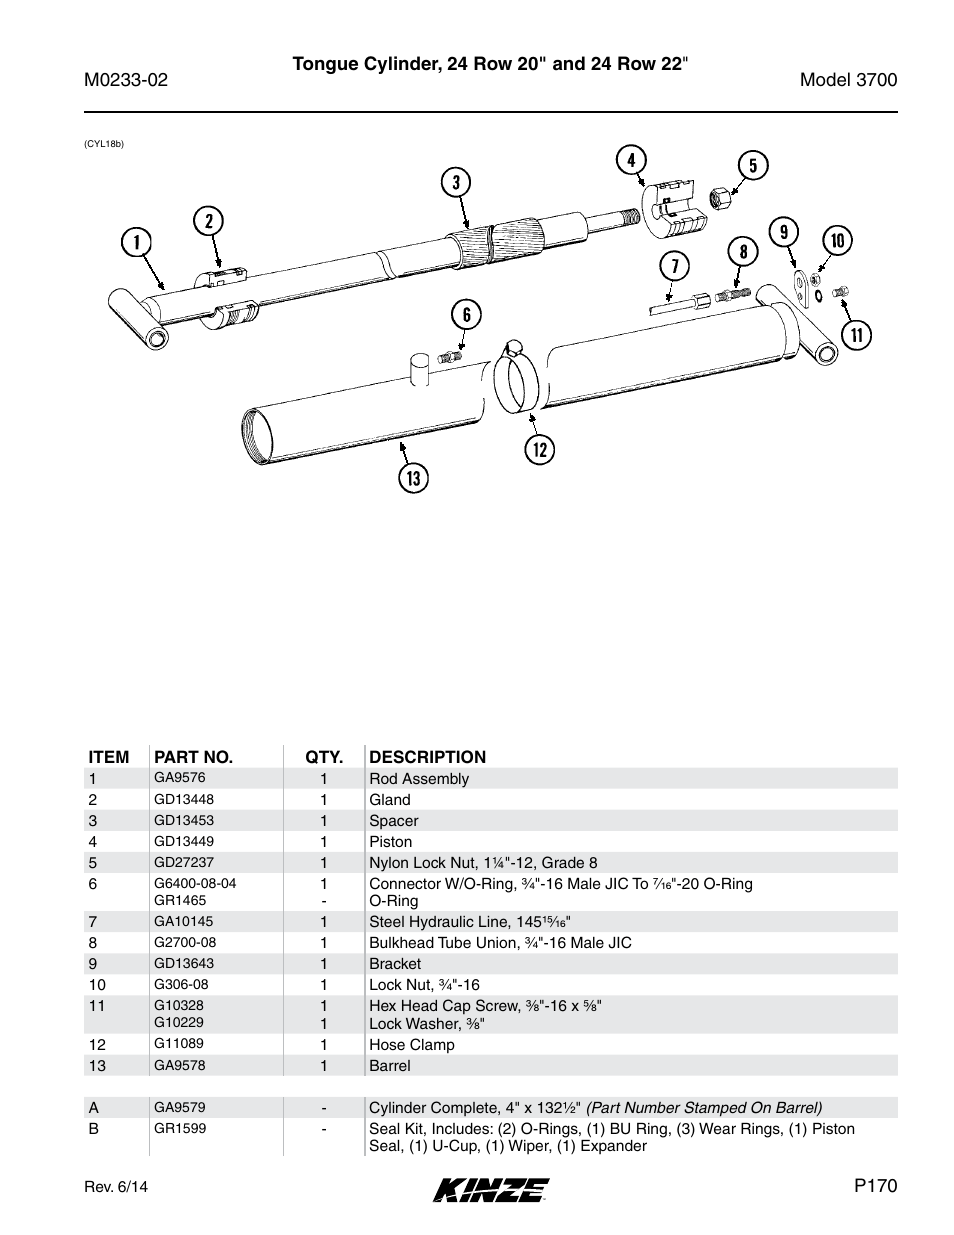 Tongue cylinder, 24 row 20" and 24 row 22 | Kinze 3700 Front Folding Planter Rev. 6/14 User Manual | Page 173 / 284